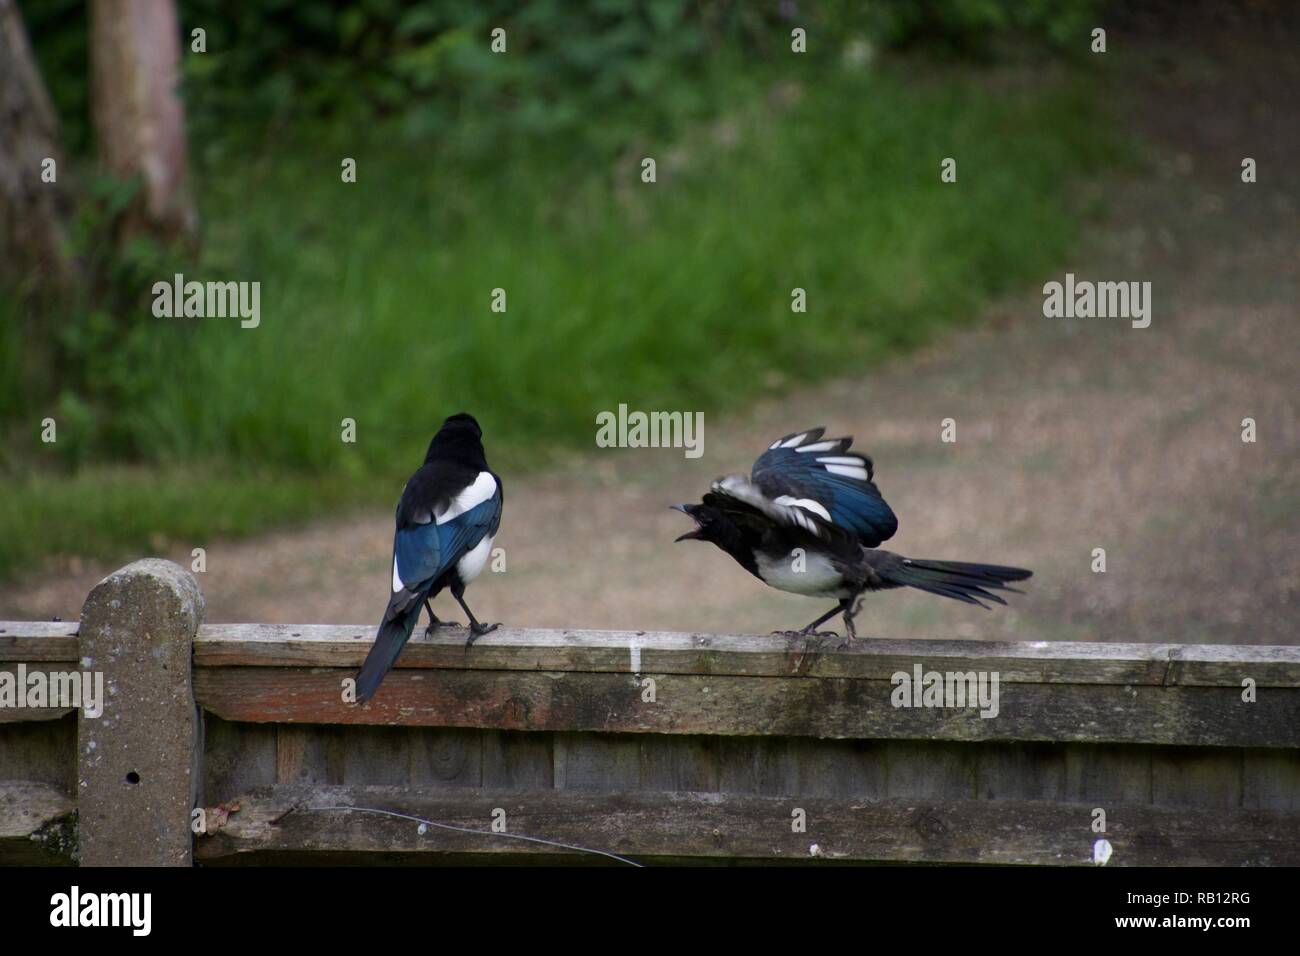 A juvenile magpie on a fence near an English country lane demands food from its parent, flapping its wings and squawking Stock Photo